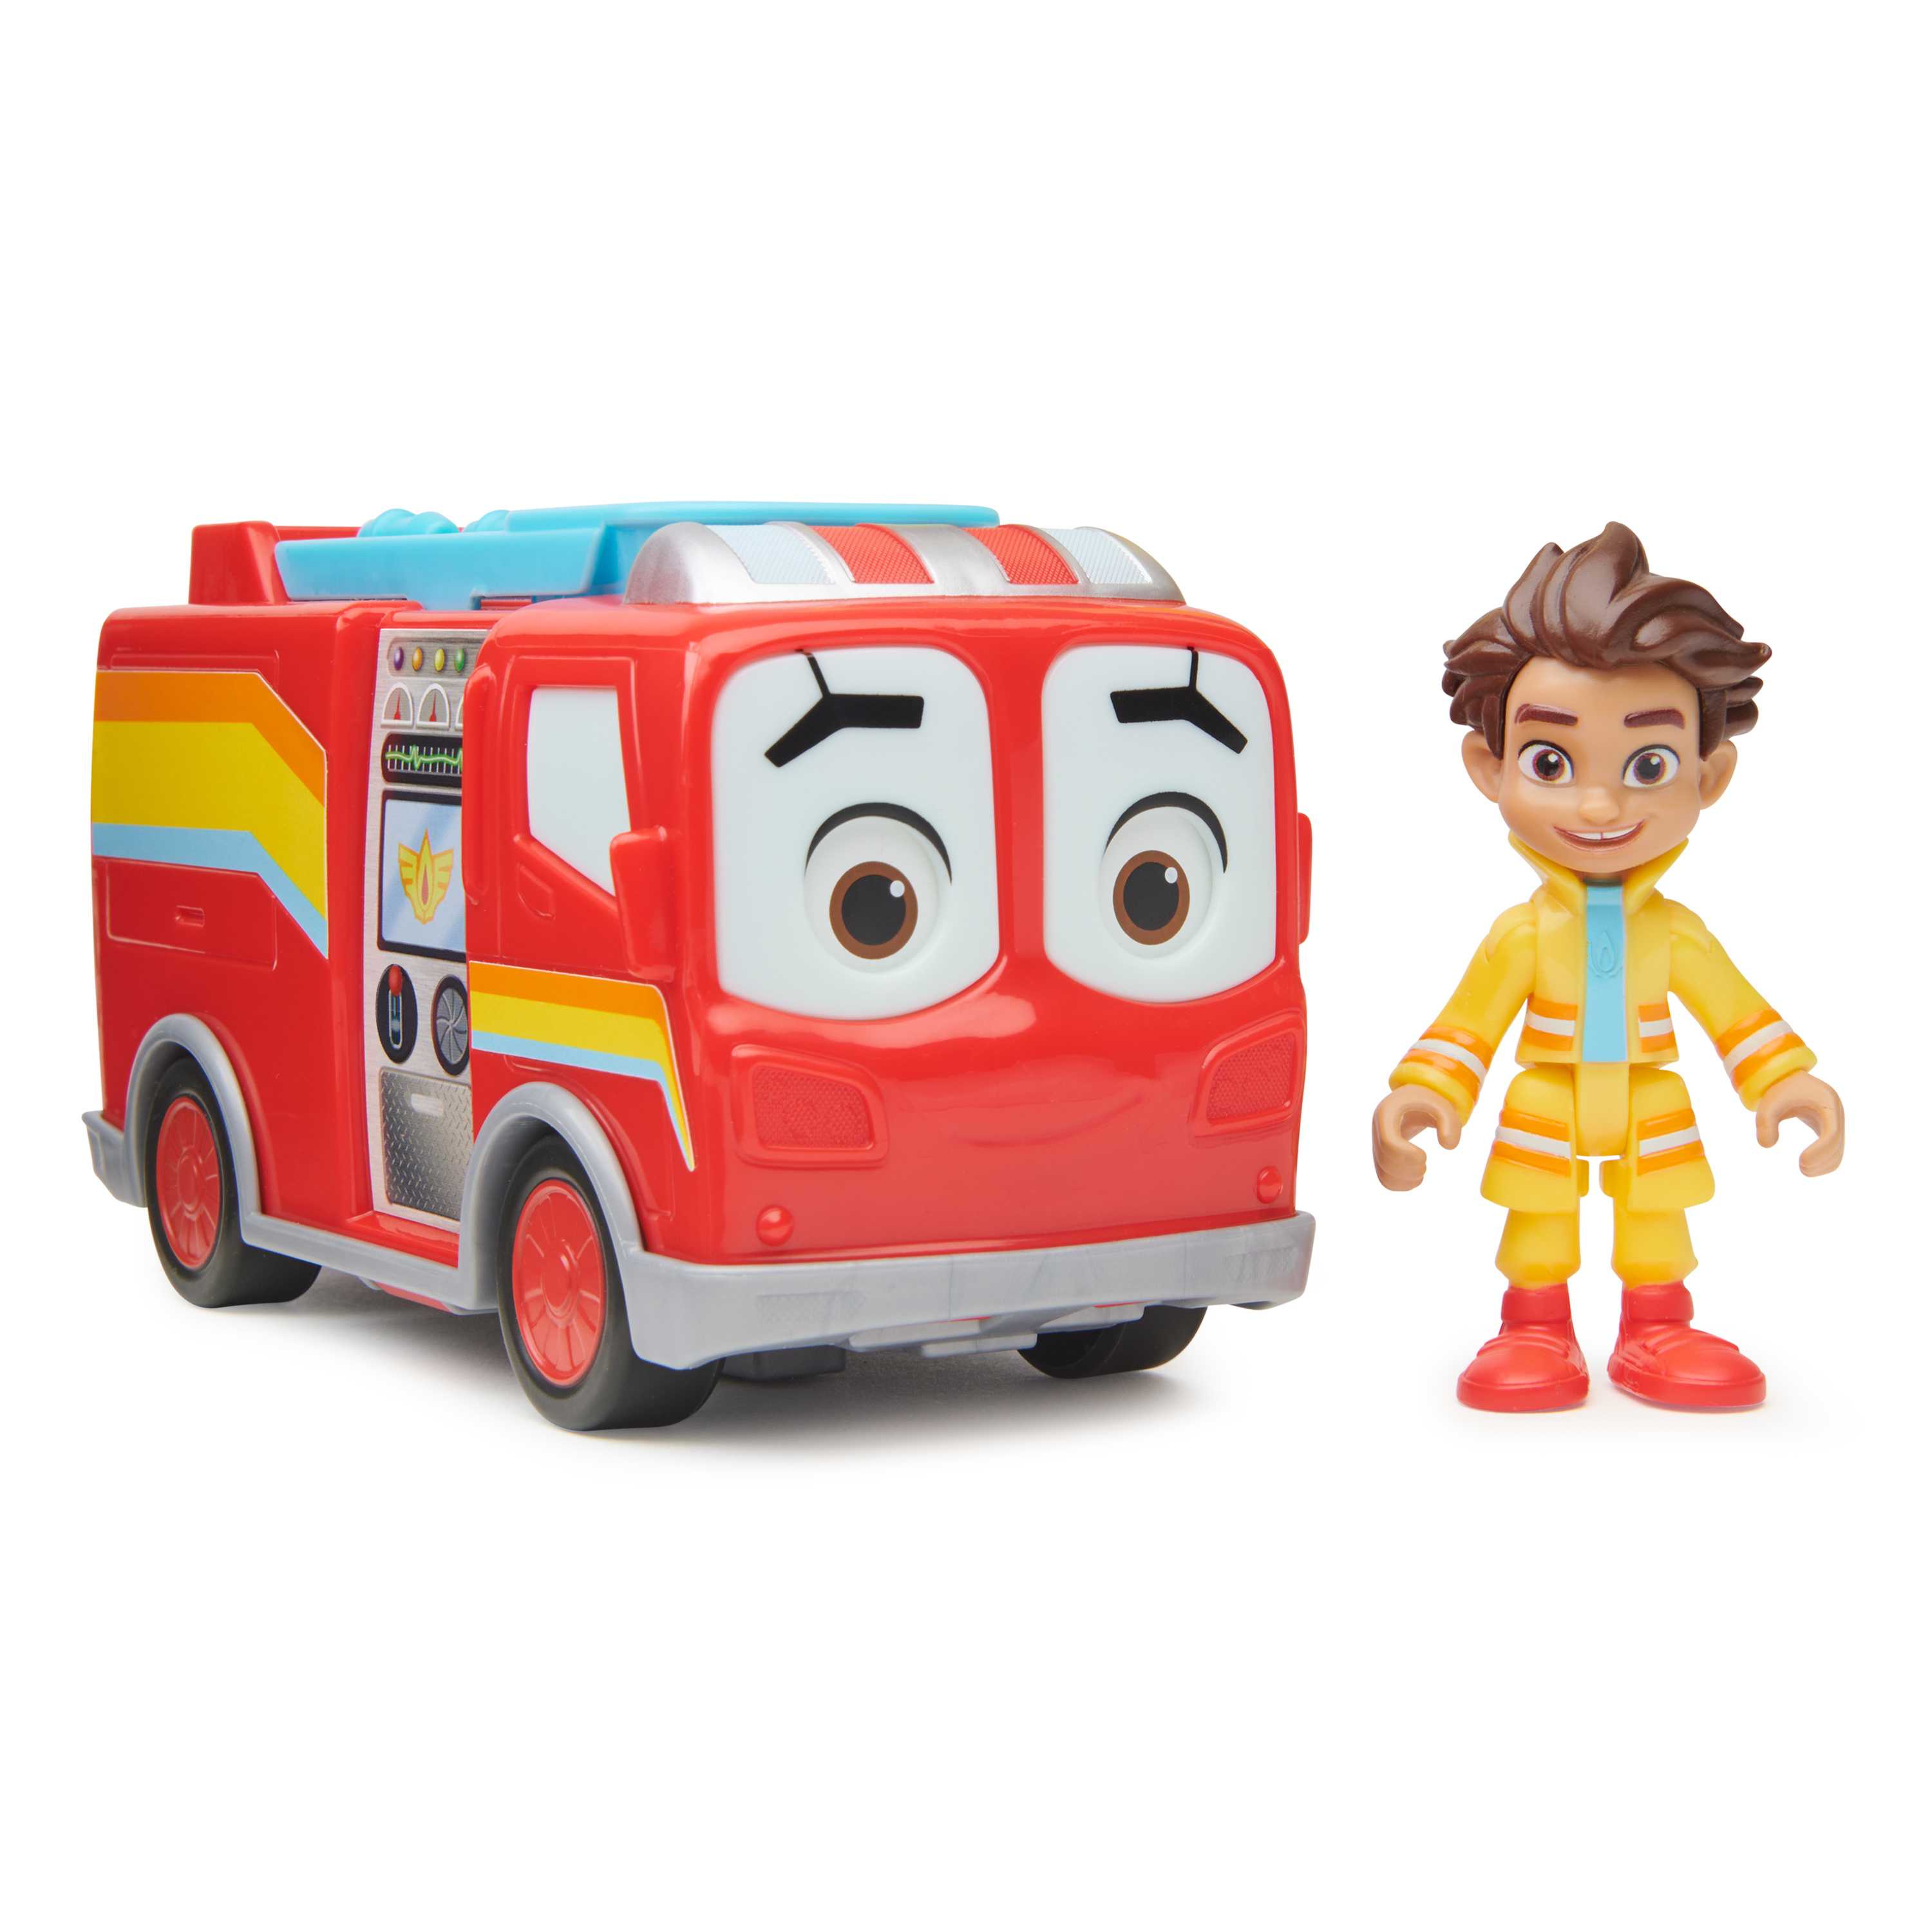 Disney Junior Firebuds, Bo and Flash, Action Figure and Fire Truck Vehicle